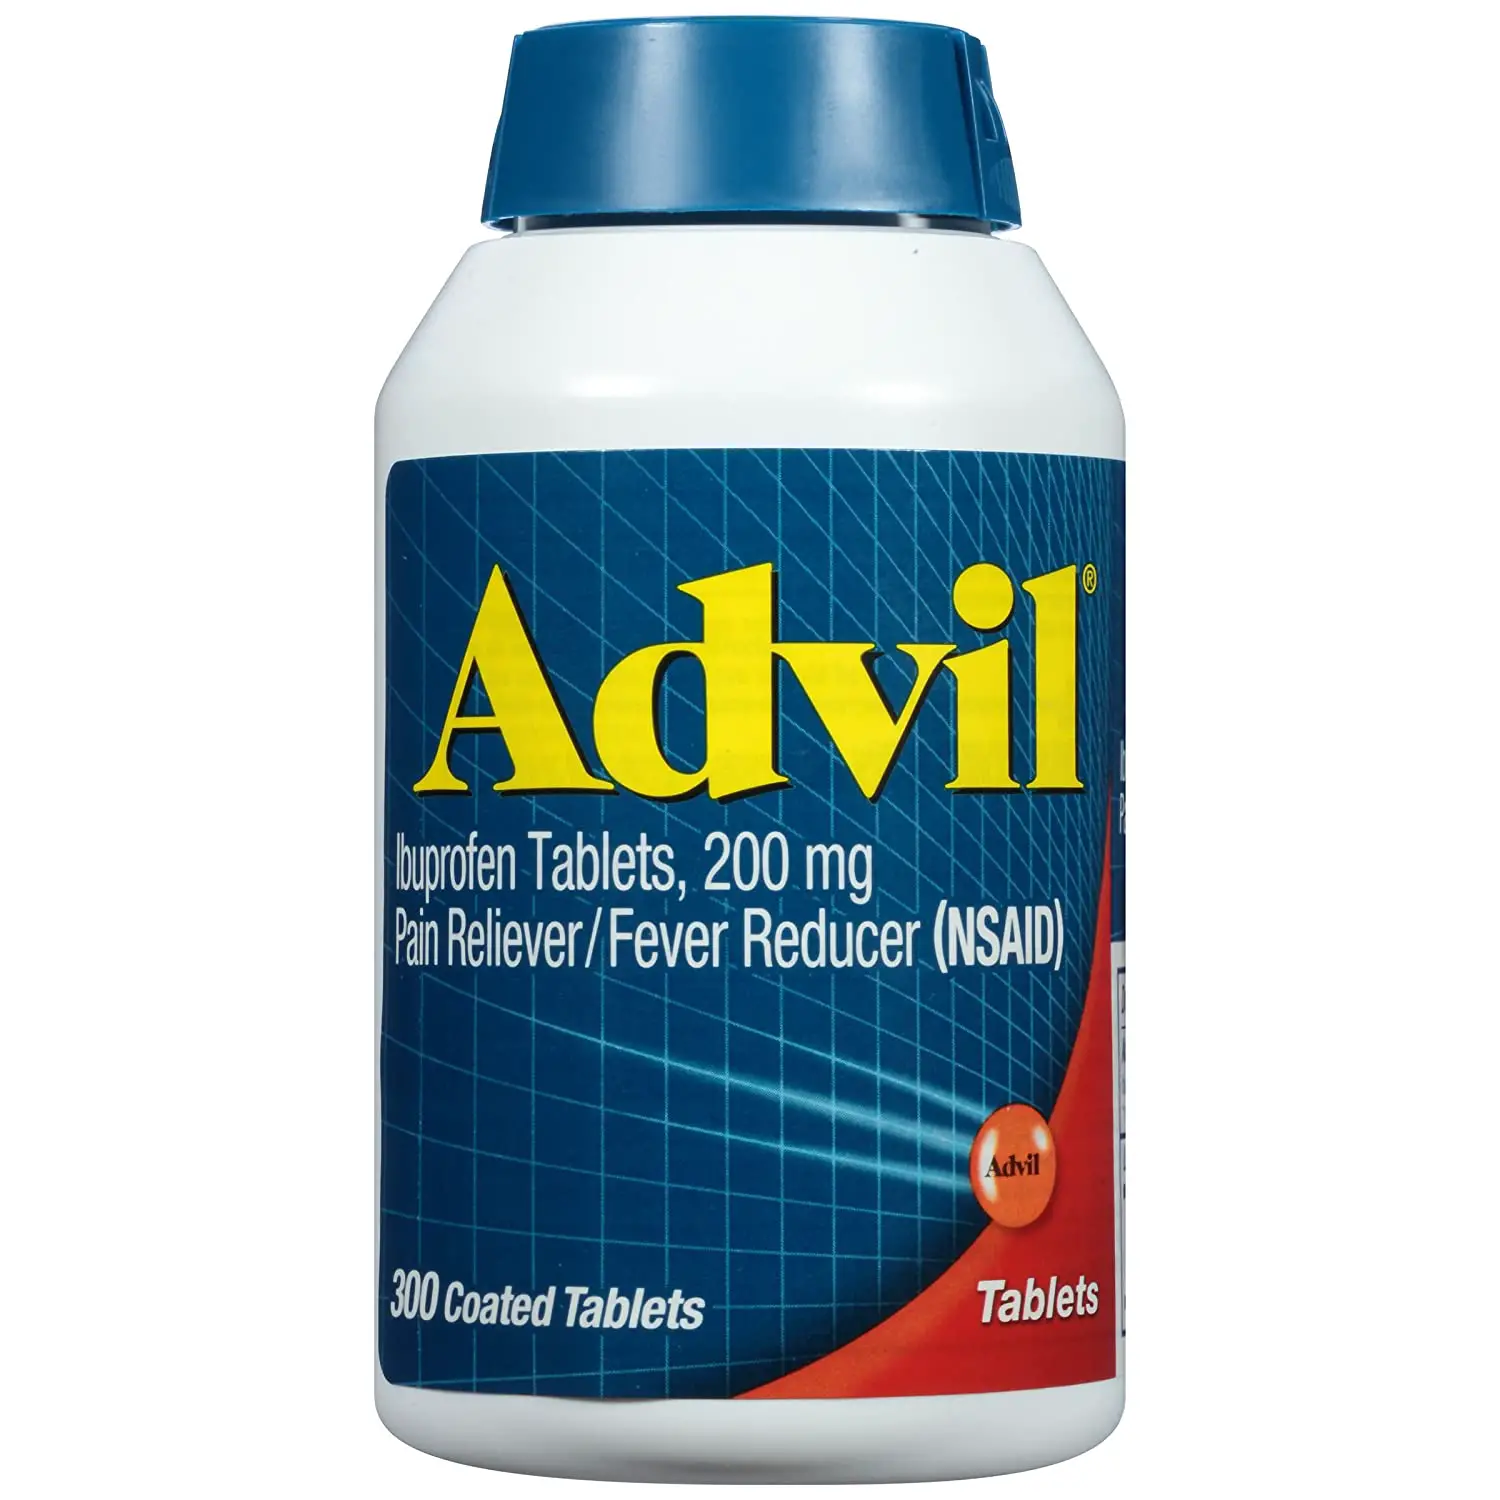 Amazon.com: Advil Pain Reliever / Fever Reducer Coated Tablet, 300 ...